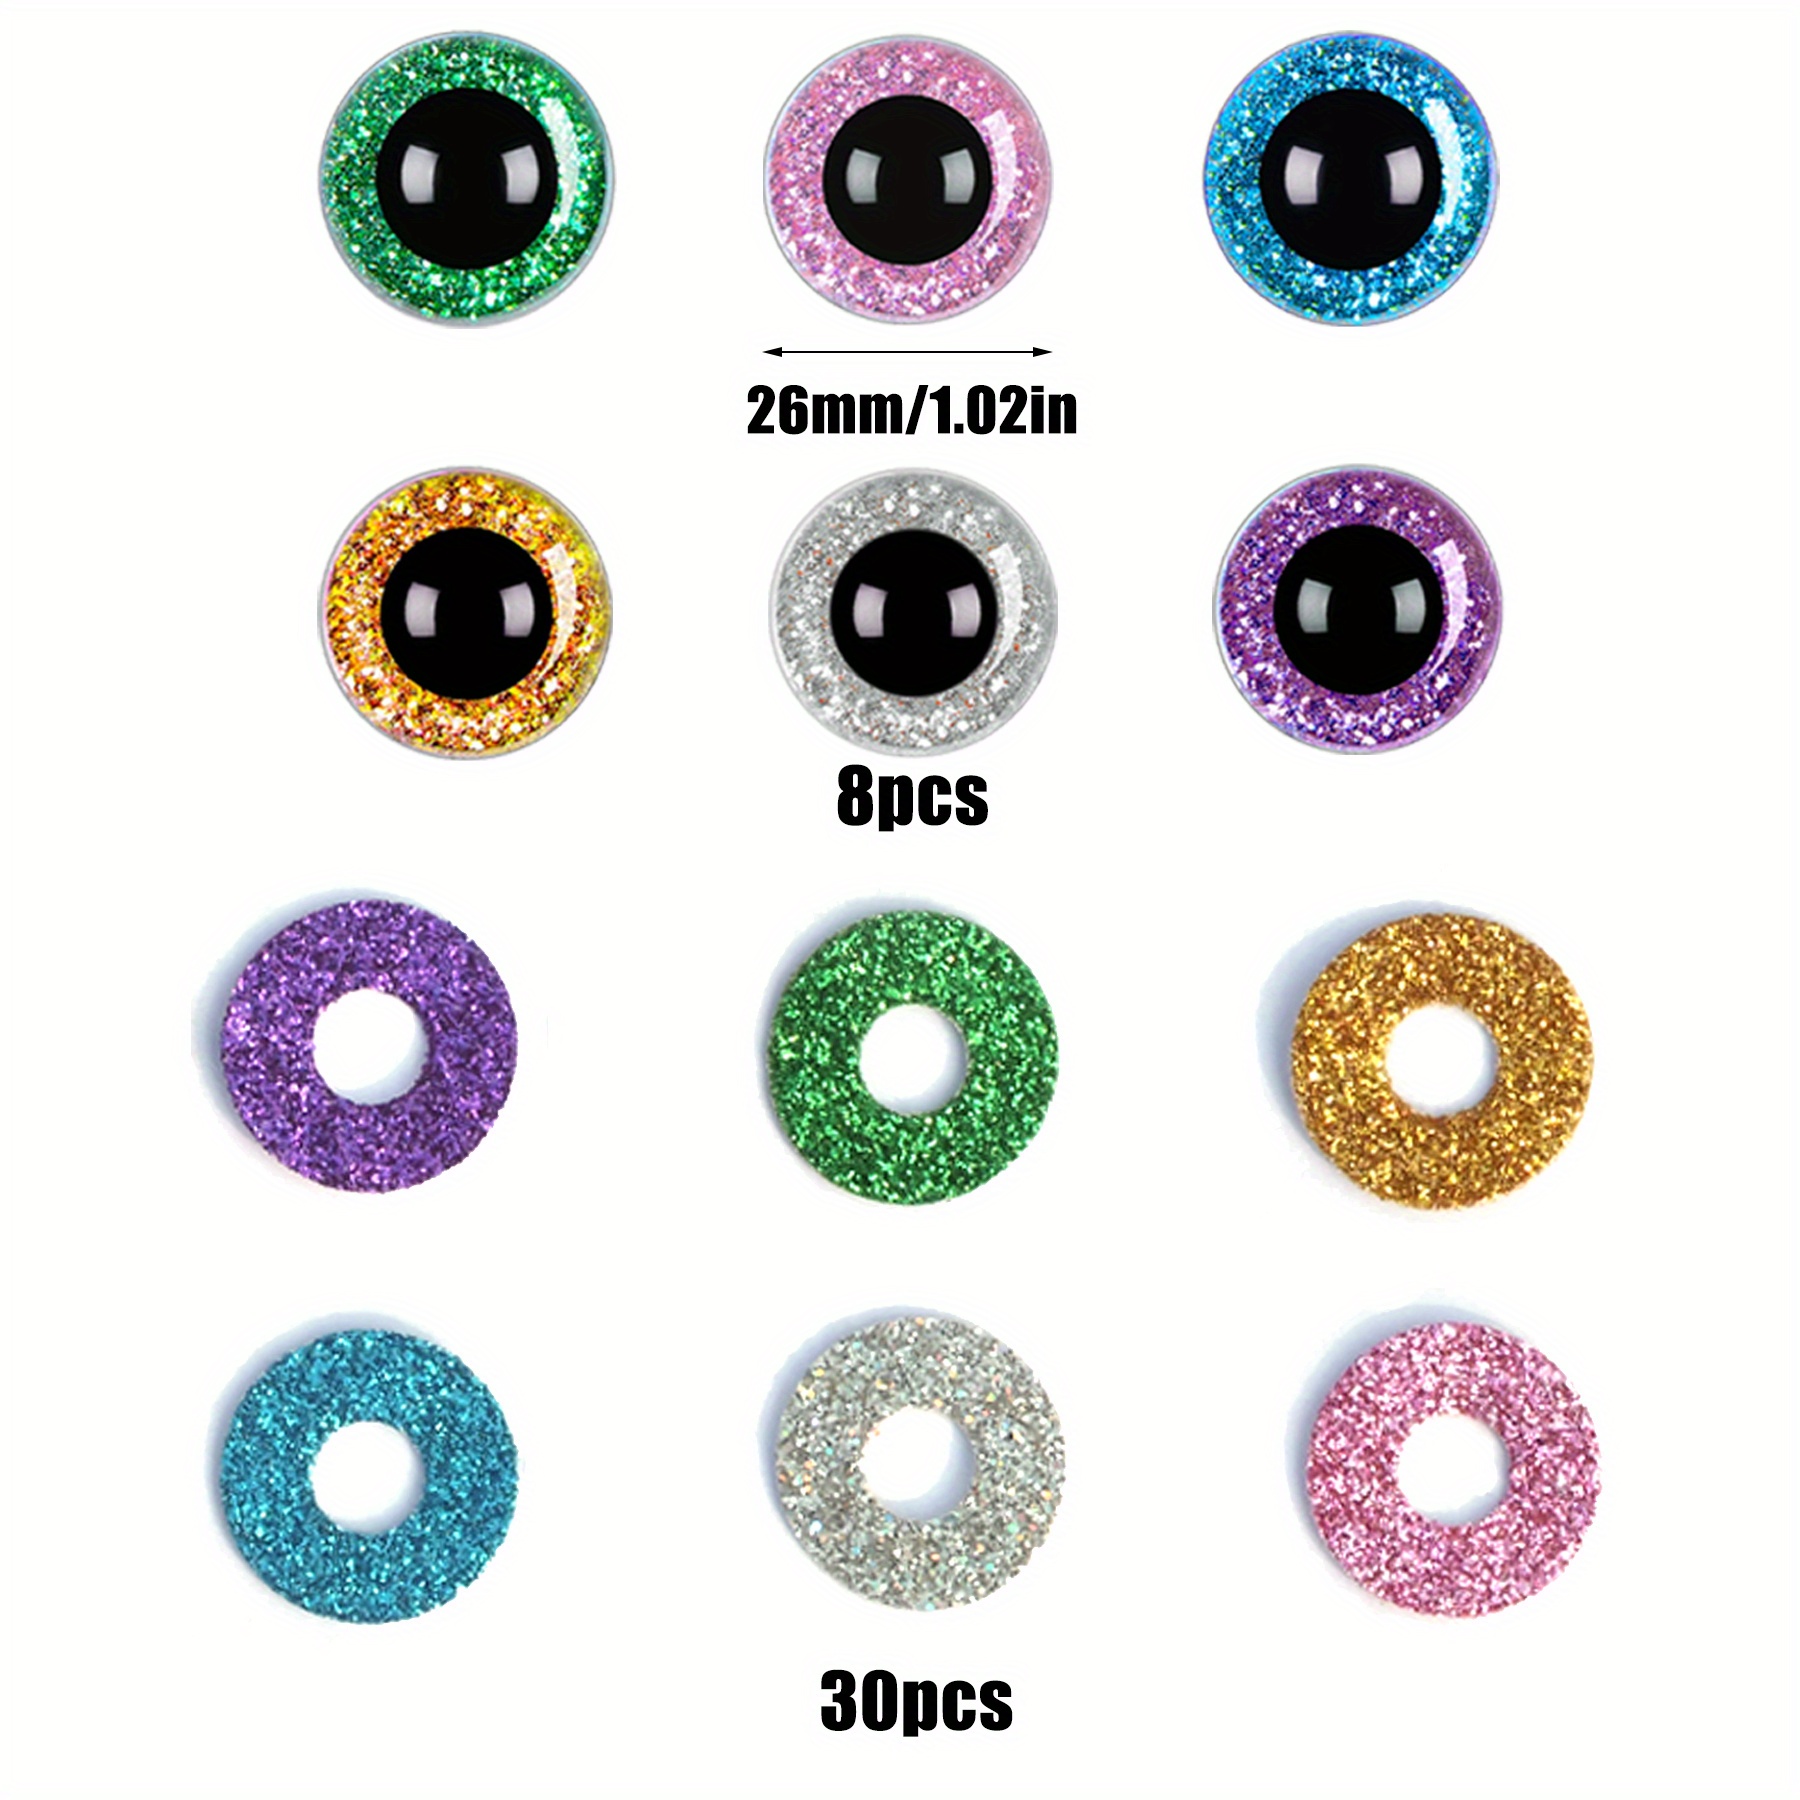 3Pairs New 3D Glitter Plush Plastic Safety Eyes For Toy Amigurumi